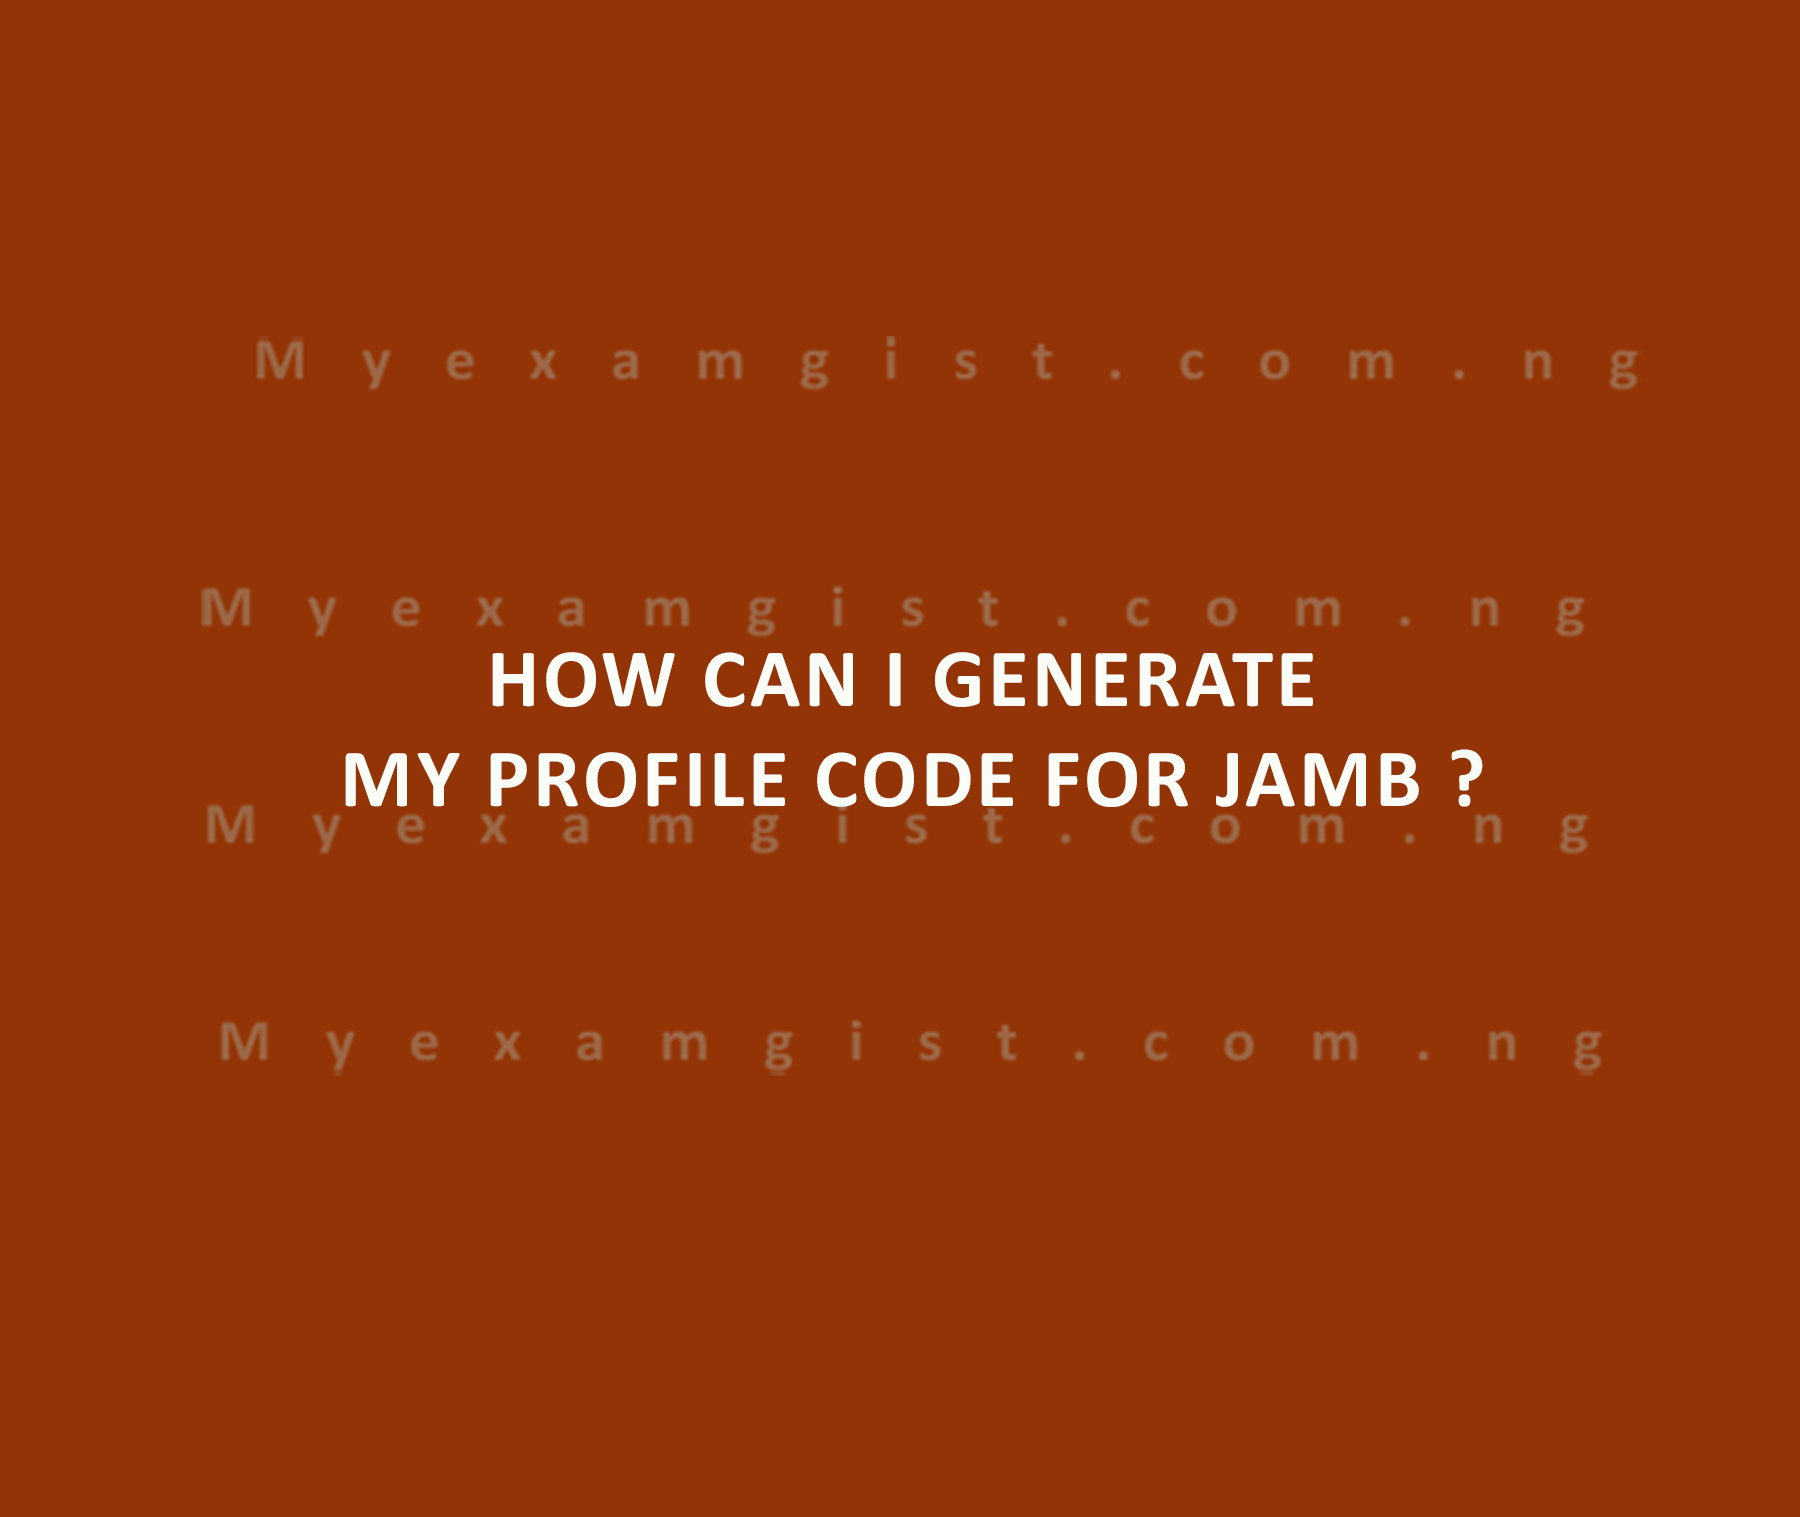 How can I generate my profile code for JAMB ?